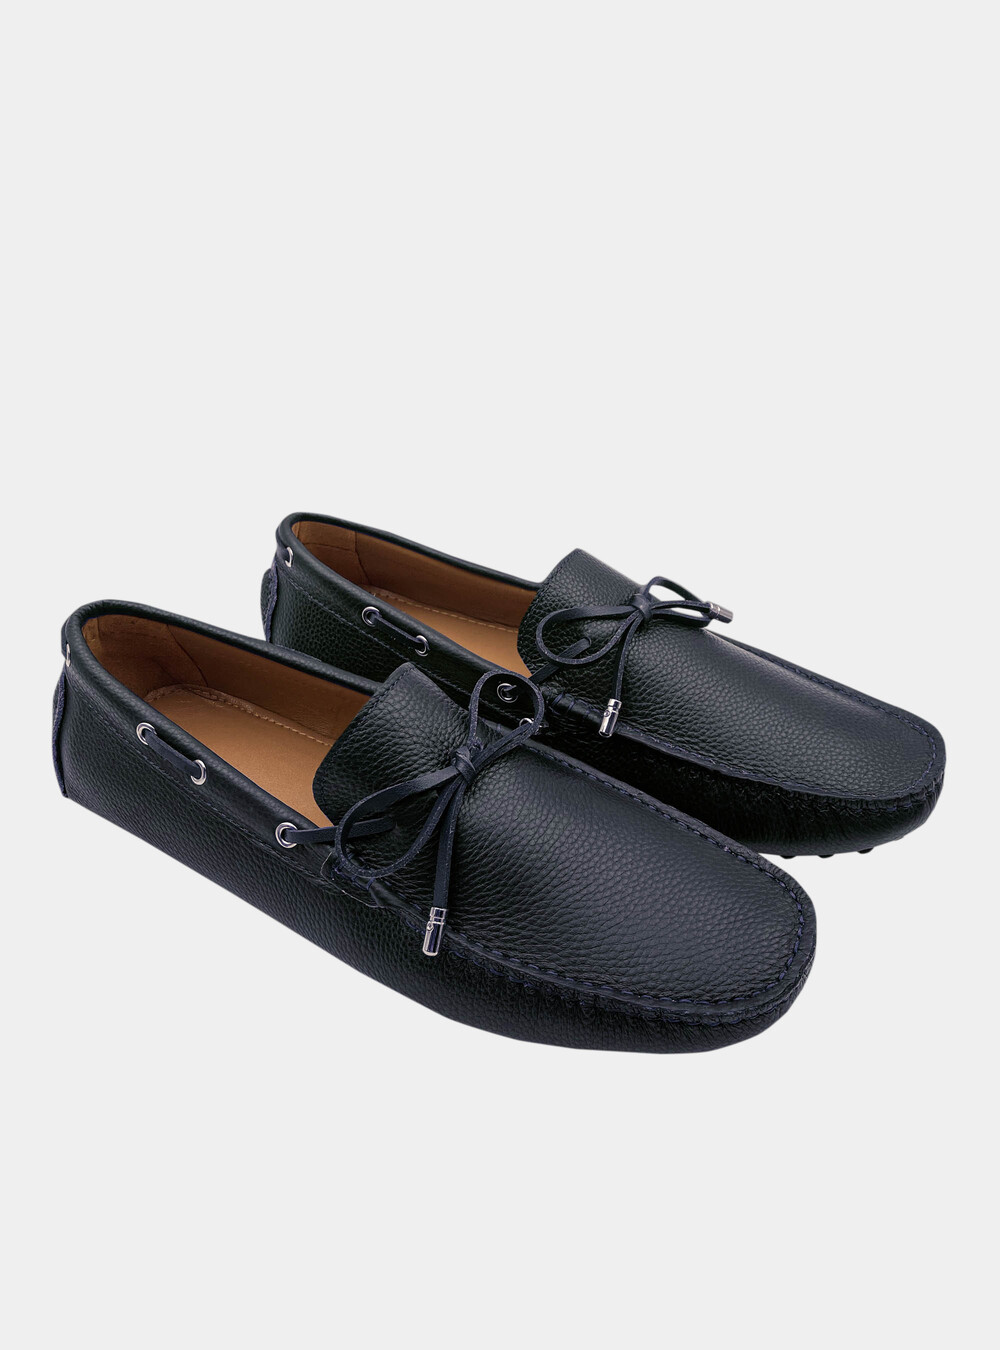 Boat leather moccasin